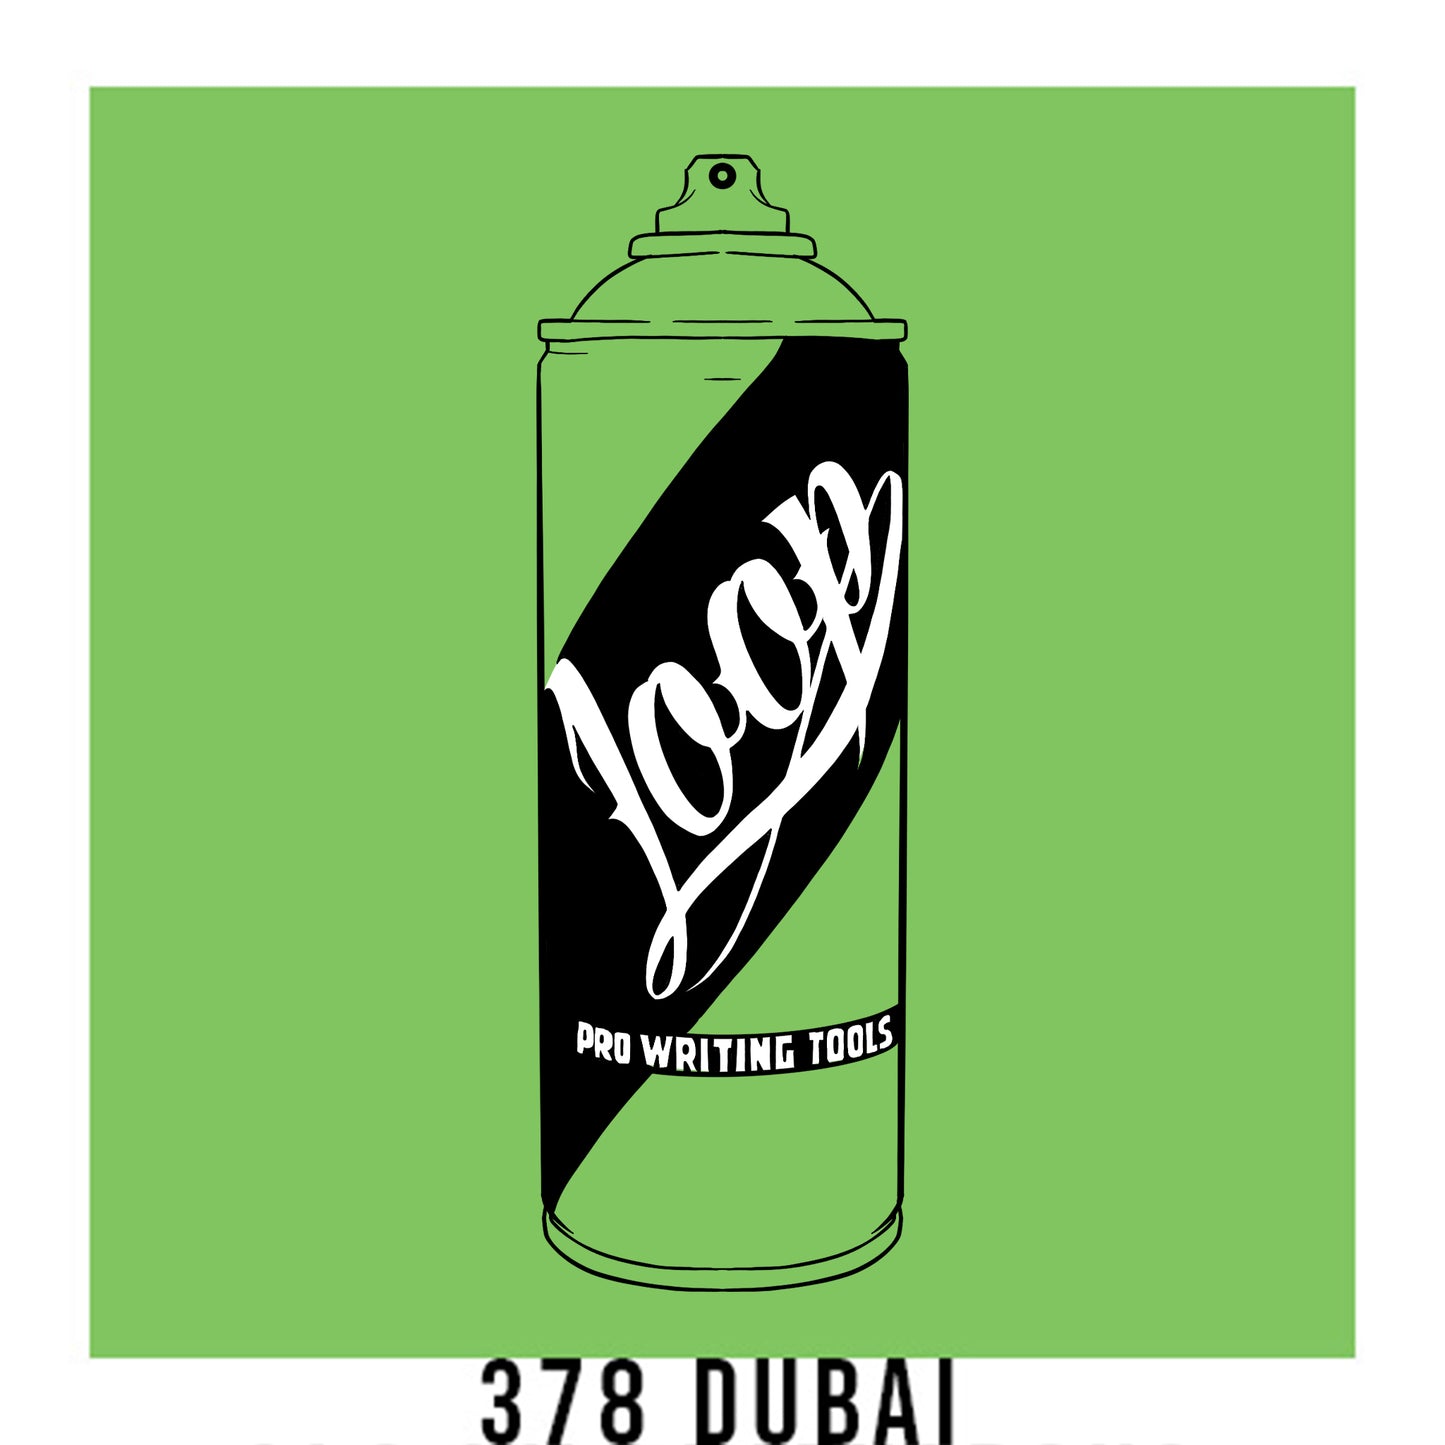 A black outline drawing of a lime green spray paint can with the word "Loop" written on the face in script. The background is a color swatch of the same lime green with a white border with the words "378 Dubai" at the bottom.